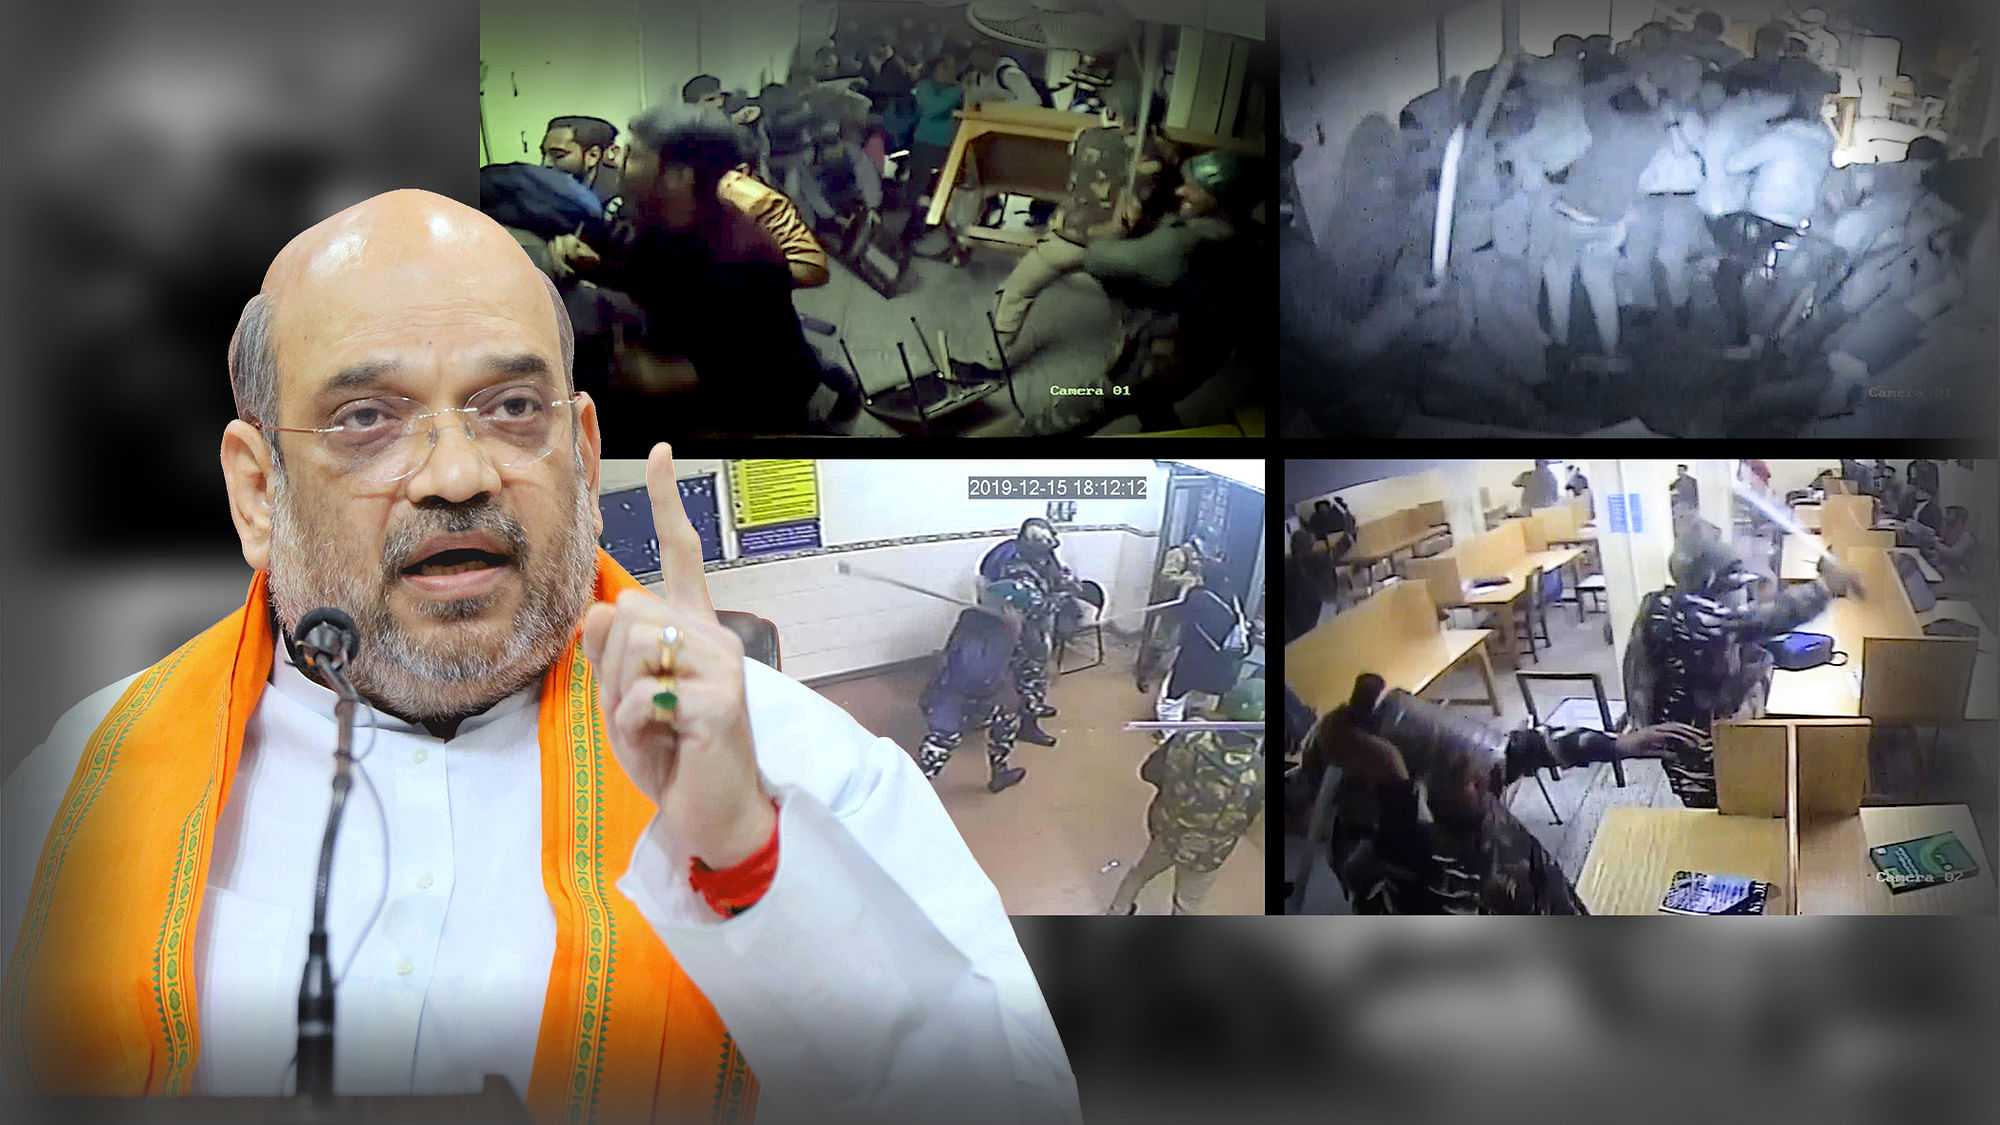 What Amit Shah claimed and what CCTV shows.